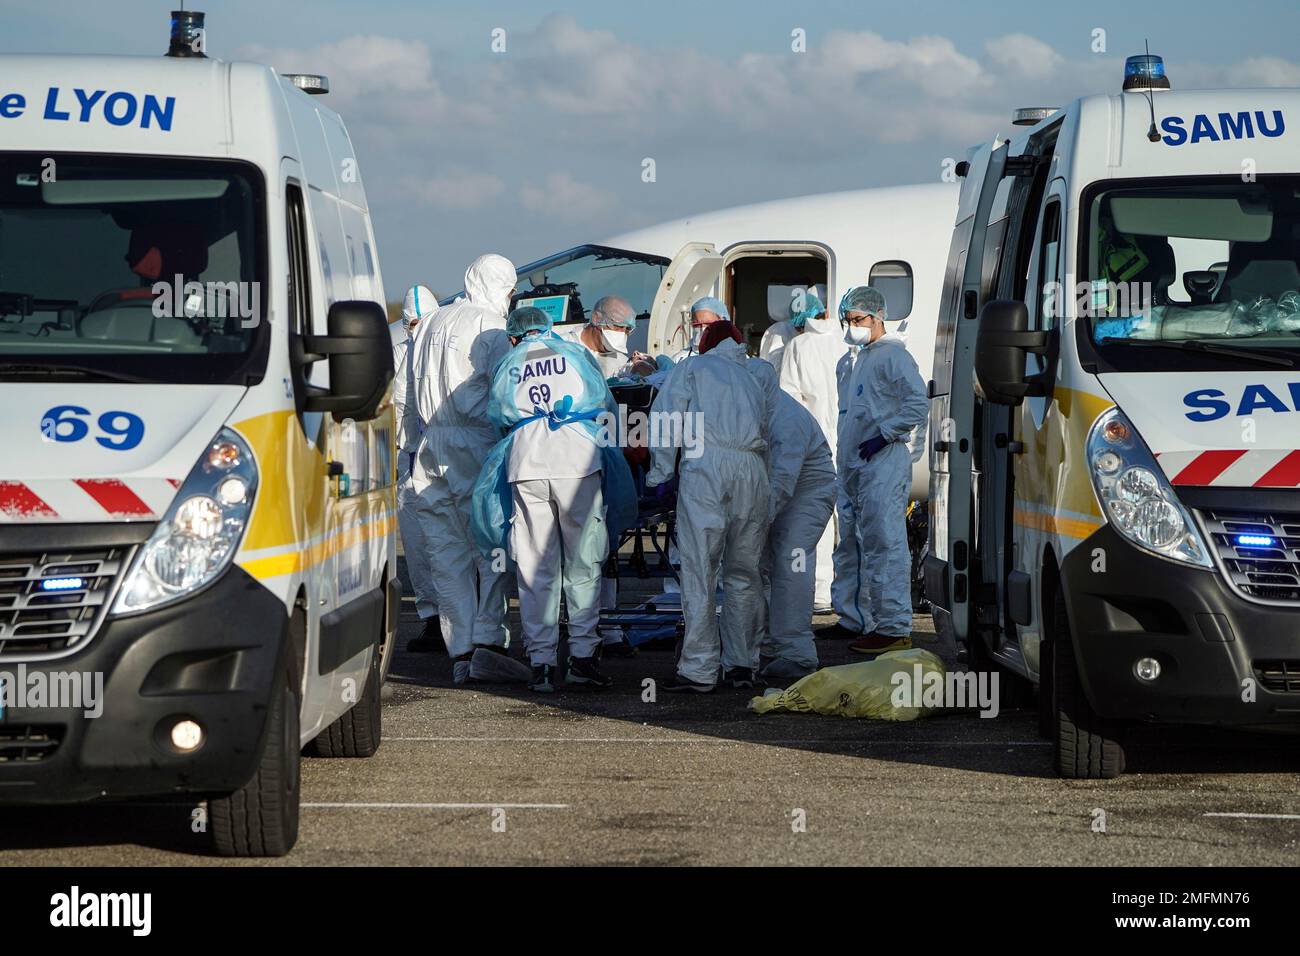 Medical staff transport a patient affected with COVID-19 to another region  from the Lyon-Bron airport, central France, Monday, Nov. 9, 2020. The  French government gradually ratcheted up from localised curfews and closures